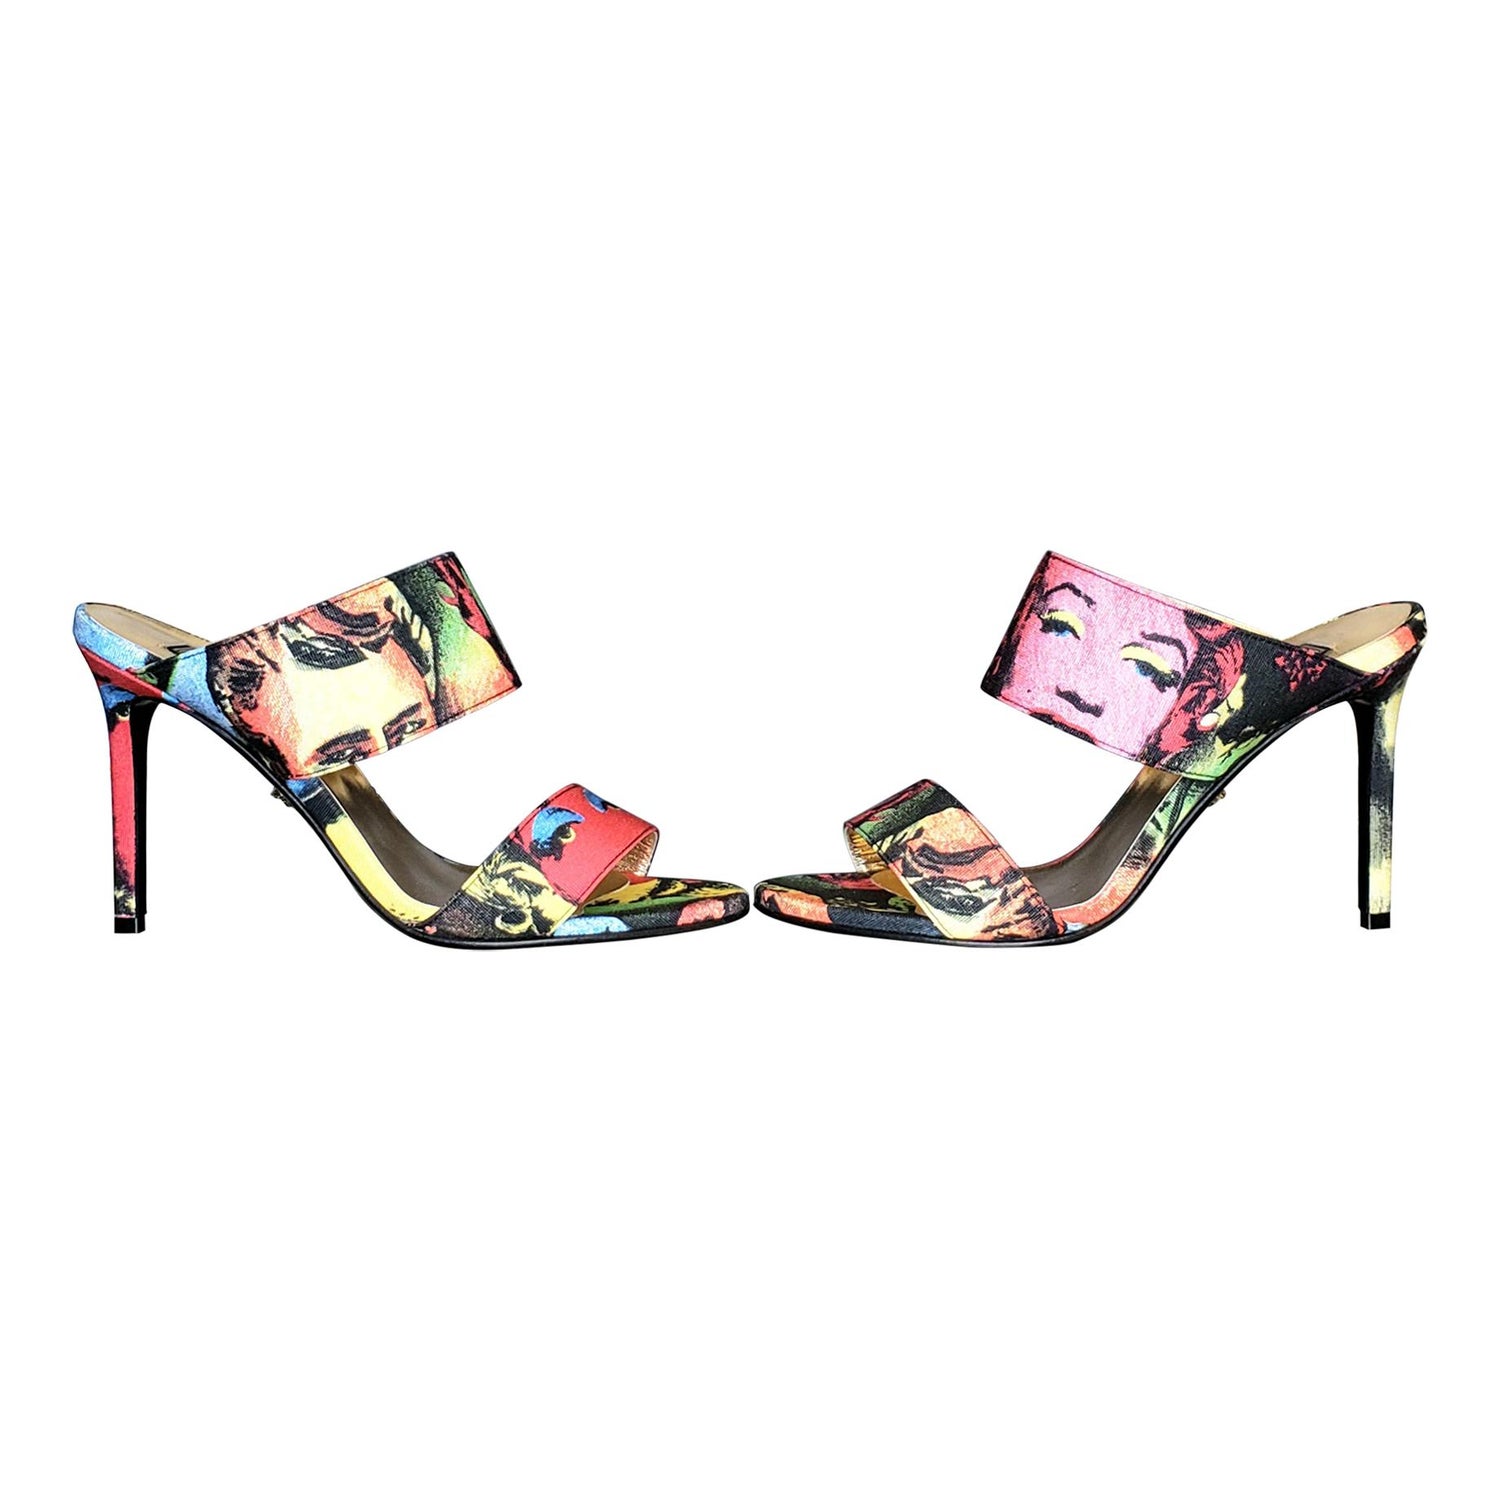 S/S 18 L# 52 VERSACE MULTI COLOR MARILYN MONROE TRIBUTE 1990 size 37 - 7  For Sale at 1stDibs